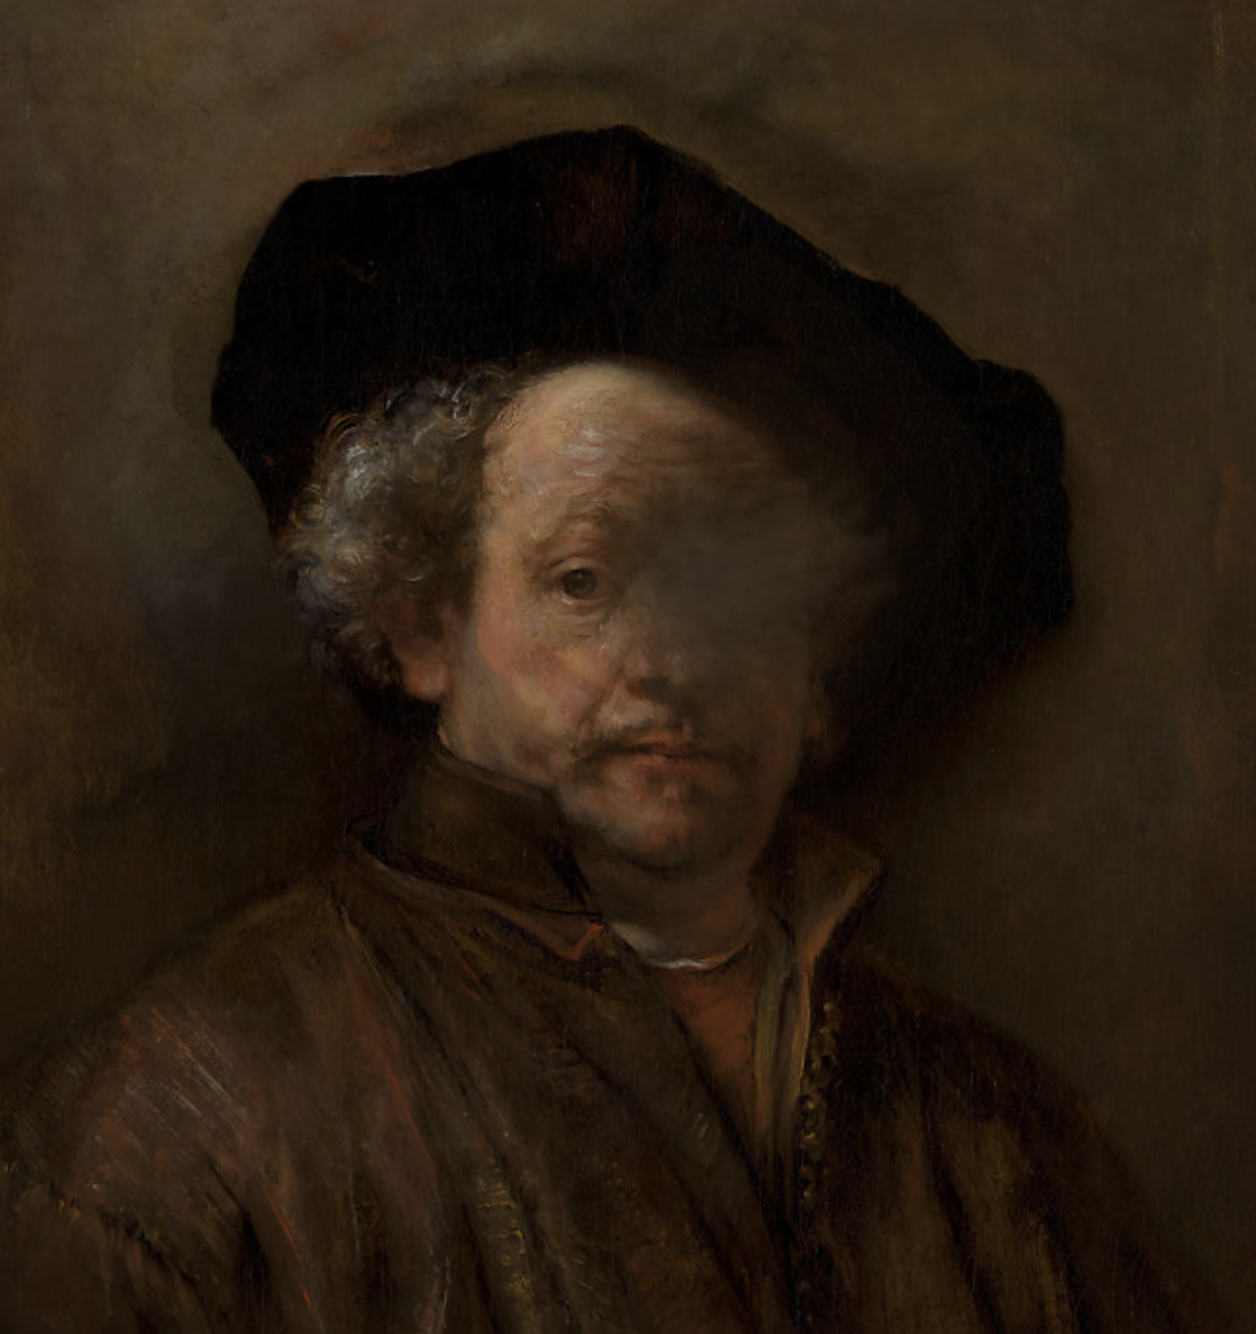 Three quarter portrait painting of an aging man in a wide brimmed black hat turned to look at the viewer. Warm, dark tones surround the man with his upturned collar. Curly graying hair frame a mysterious look that might be one of concern or worry. To illustrate the effect of partial vision loss, one of the eyes in the portrait is obscured by a smoky, dark cloud.